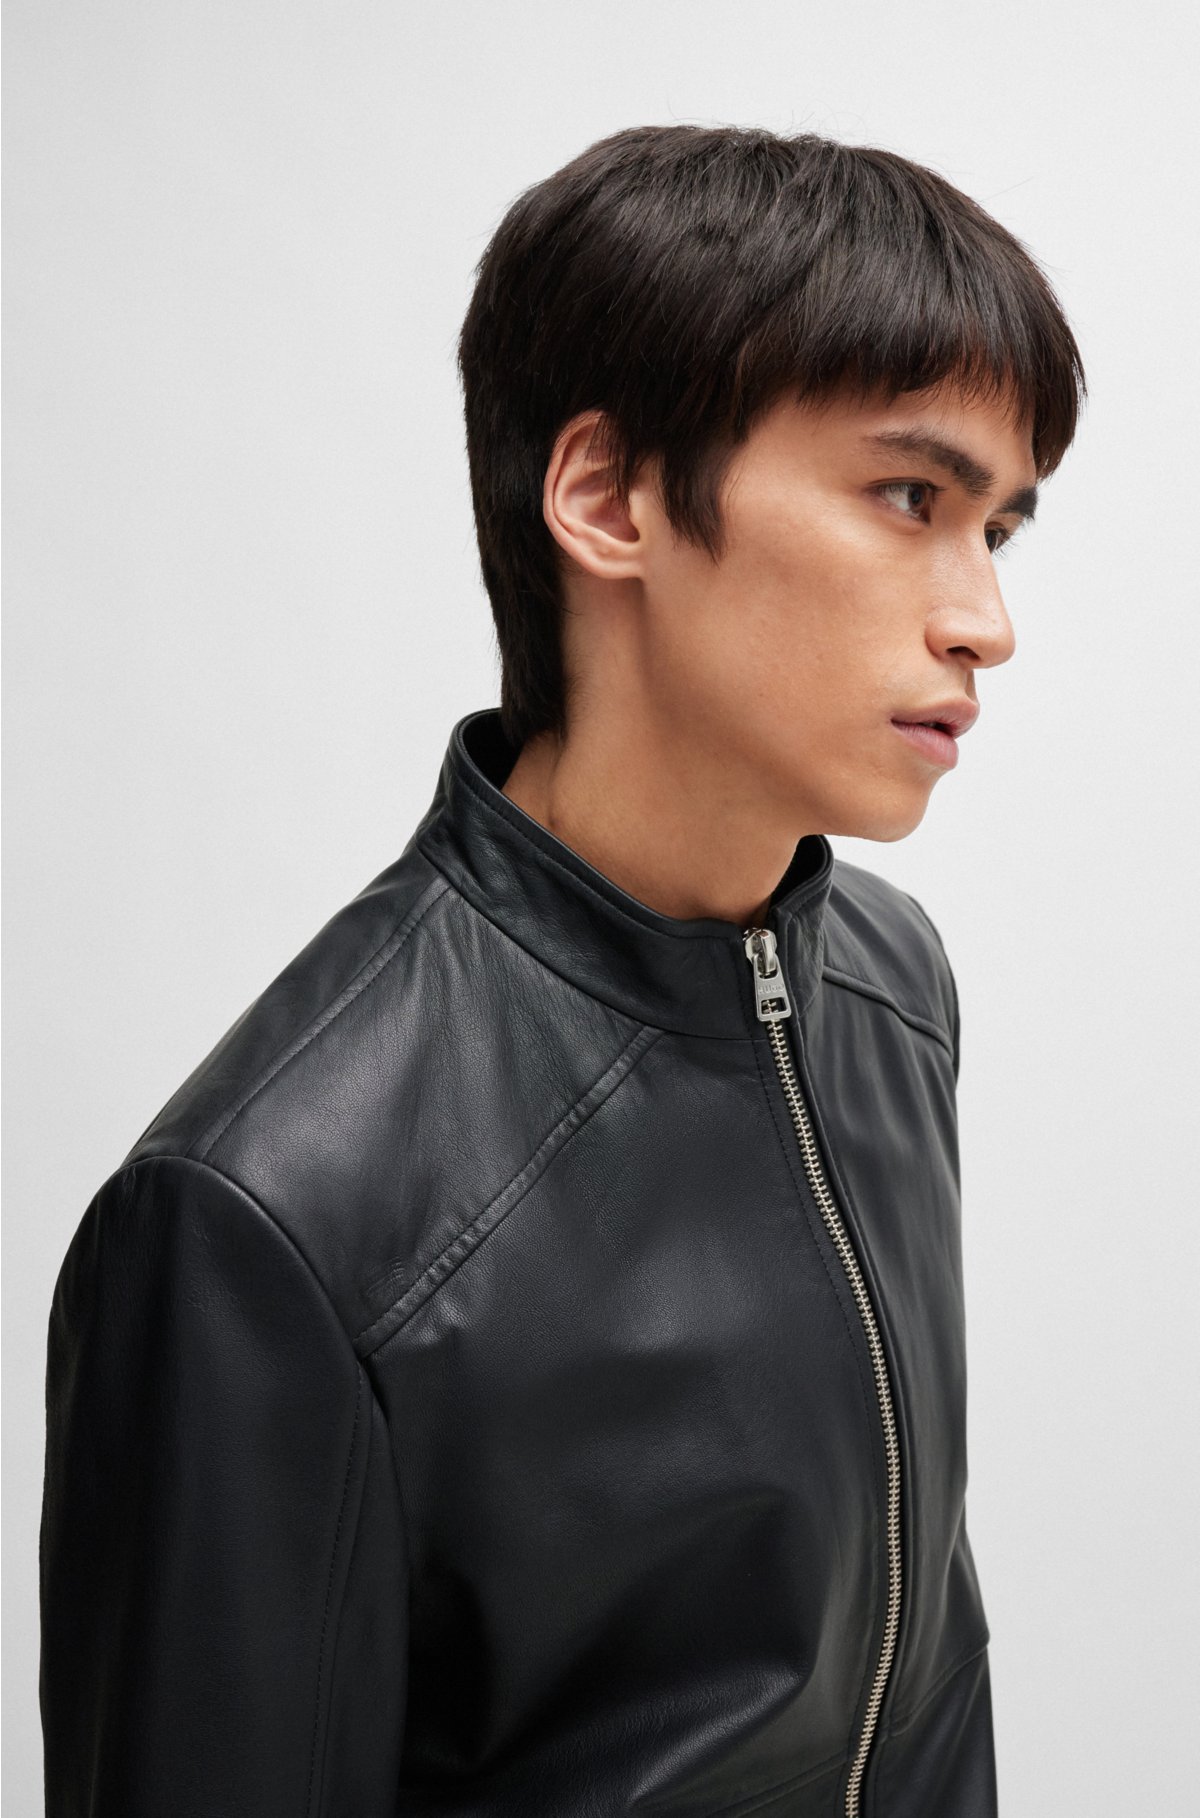 Extra-slim-fit leather jacket with red lining, Black